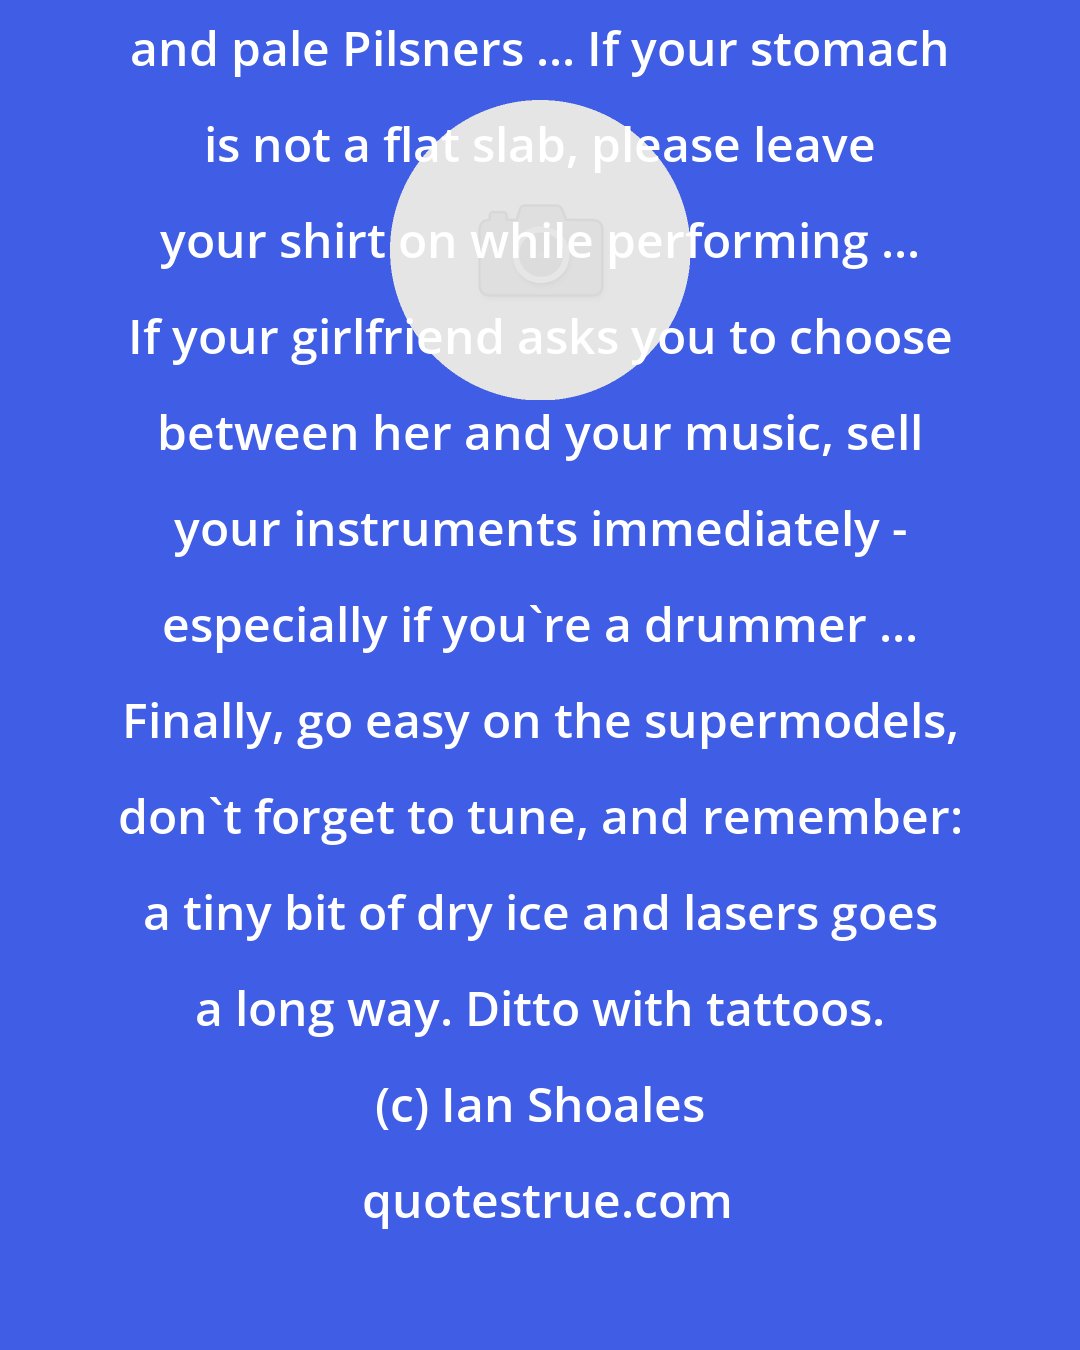 Ian Shoales: Advice to rock gods: drugwise, stick to Ibuprofen, decaf lattes, and pale Pilsners ... If your stomach is not a flat slab, please leave your shirt on while performing ... If your girlfriend asks you to choose between her and your music, sell your instruments immediately - especially if you're a drummer ... Finally, go easy on the supermodels, don't forget to tune, and remember: a tiny bit of dry ice and lasers goes a long way. Ditto with tattoos.